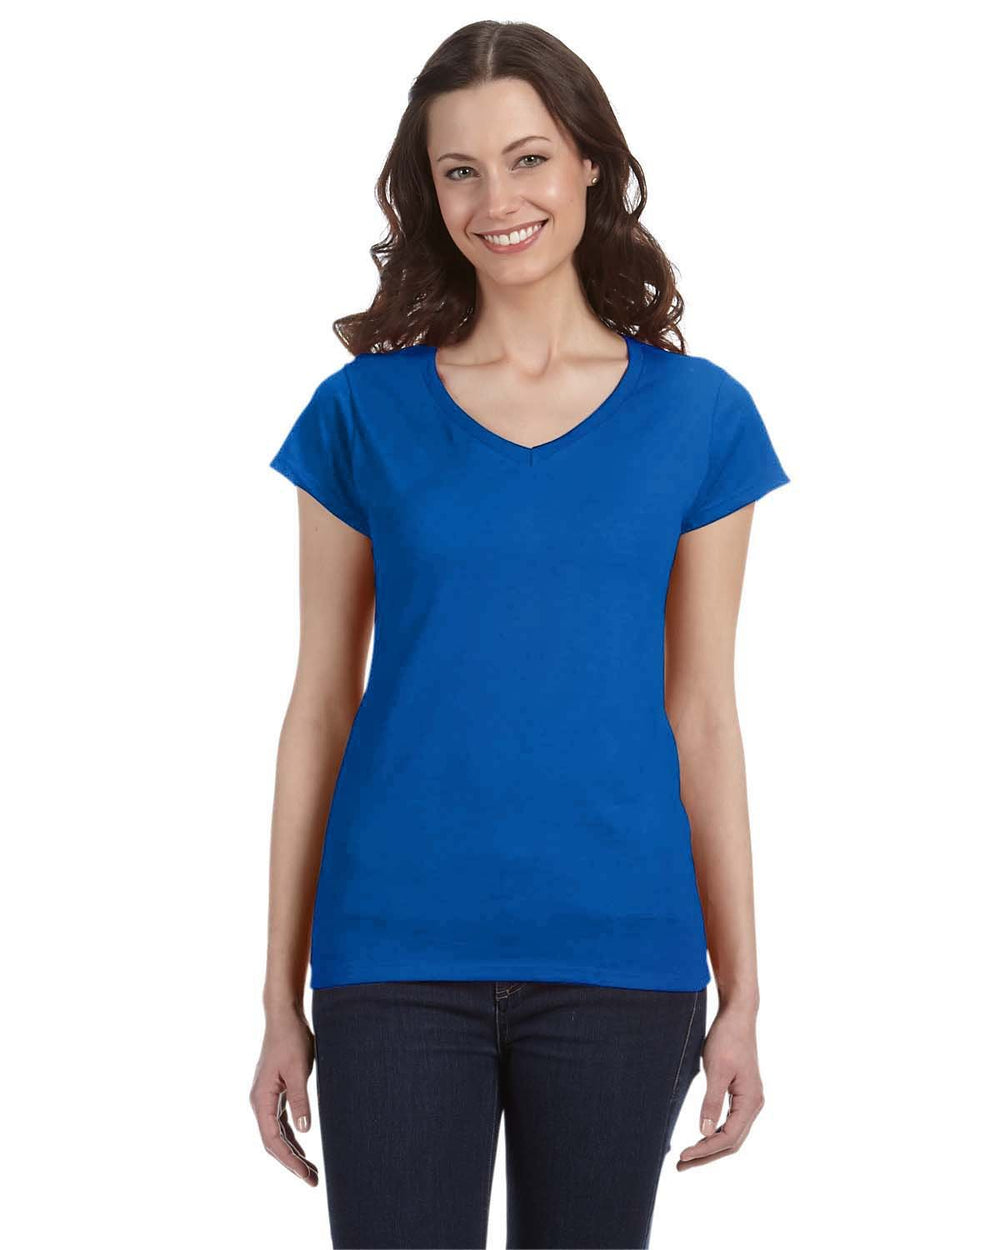 Gildan Ladies SoftStyle Fitted V-Neck T-Shirt - G640VL